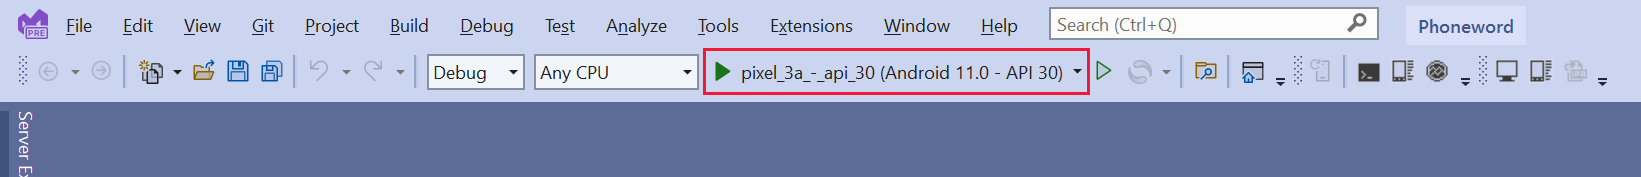 A screenshot of the Visual Studio toolbar. It shows the pixel 3 a p i 30 profile has been selected and ready to start debugging with as soon as the user presses the play button.